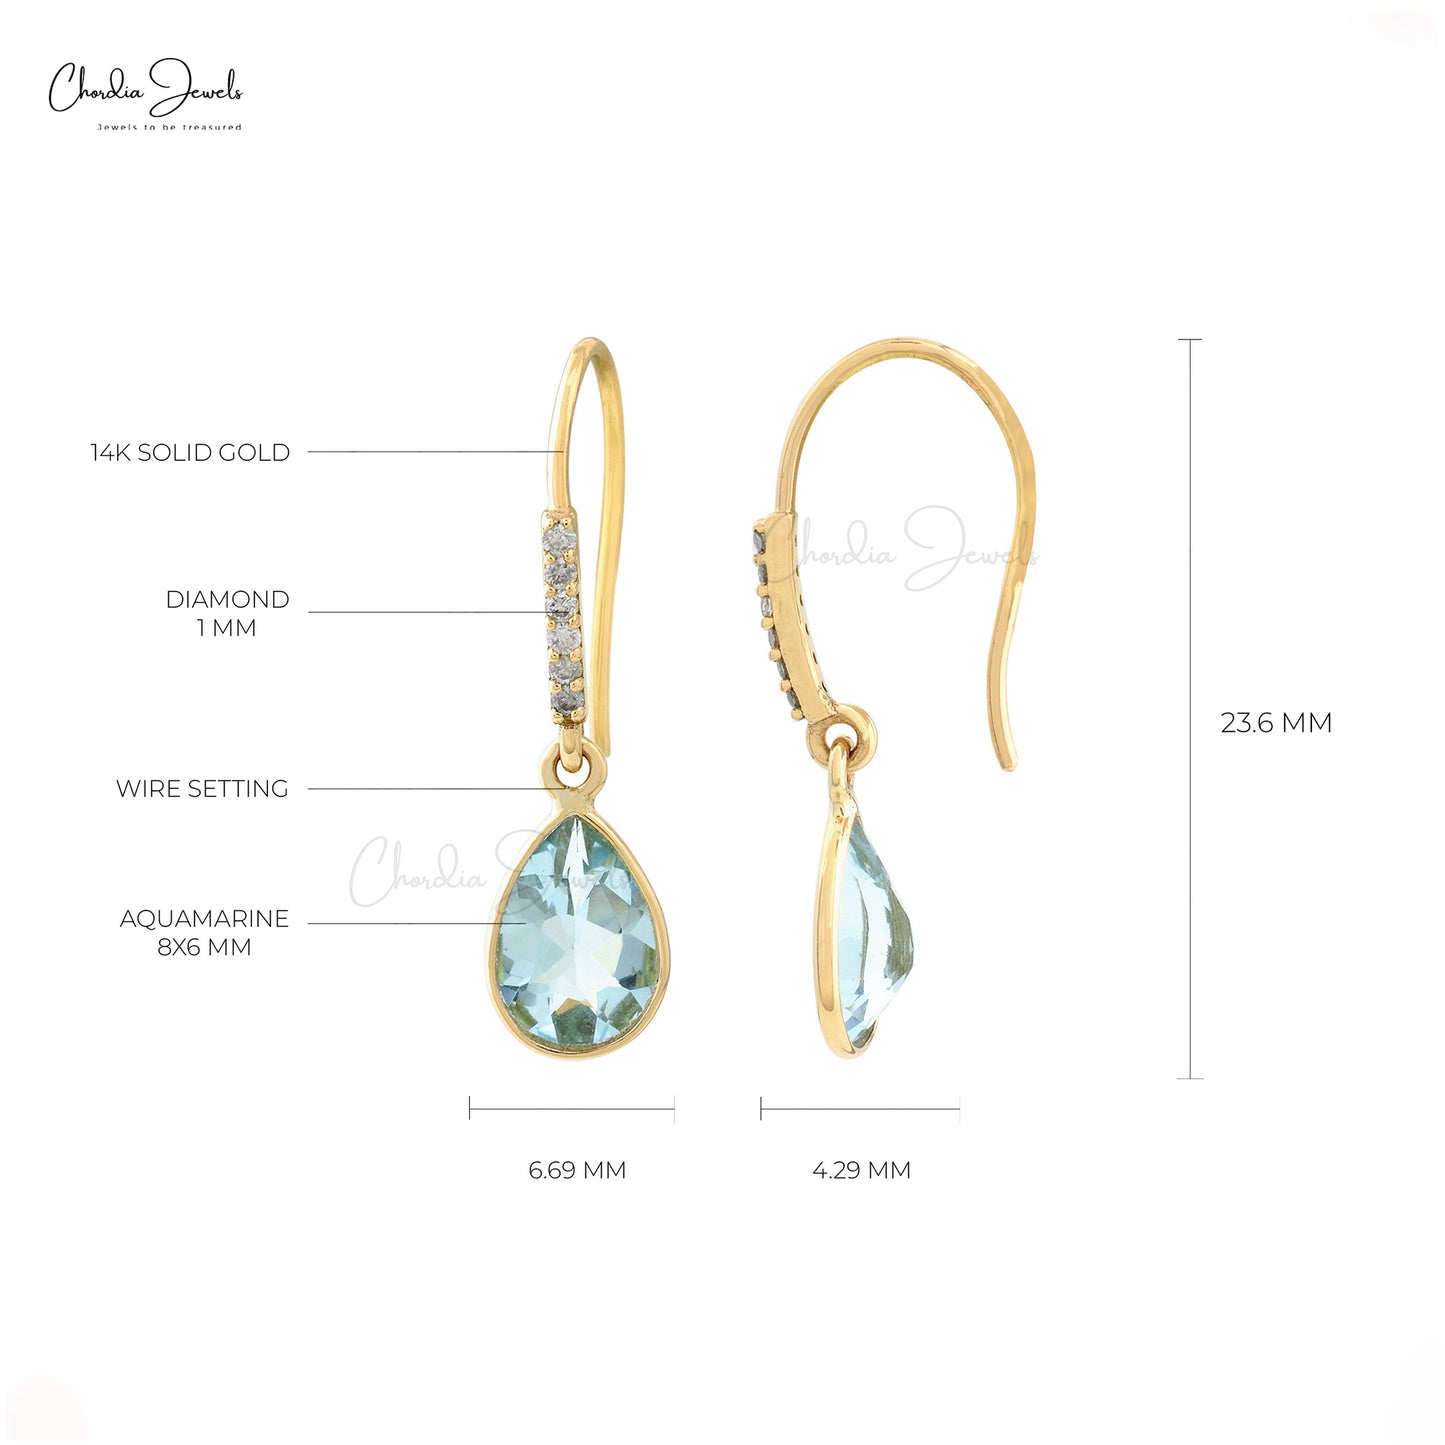 Authentic Aquamarine Earrings 1mm White Diamond Hallmarked Jewelry 14k Solid Yellow Gold  Dangle Earrings For Her